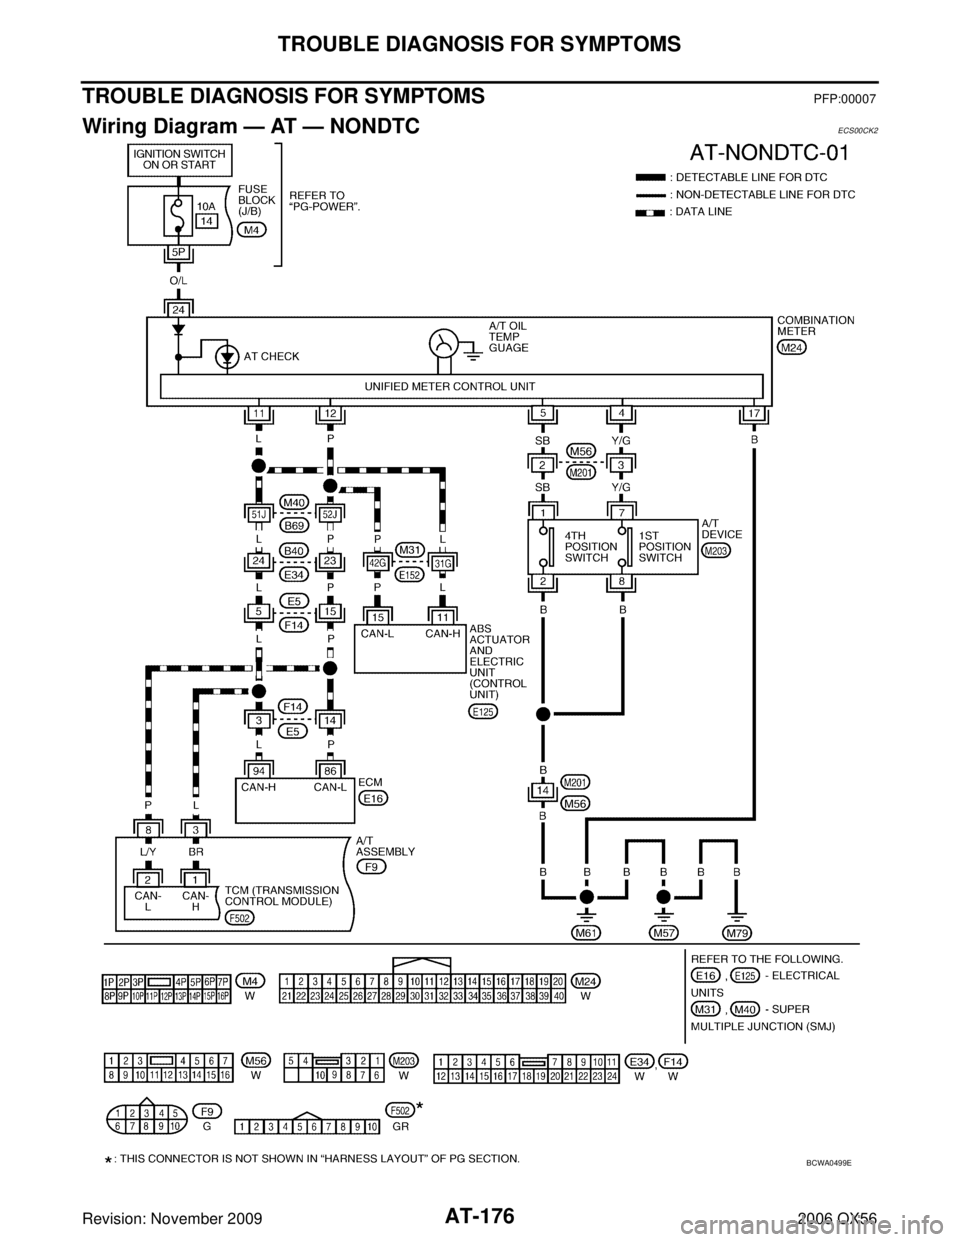 INFINITI QX56 2006  Factory User Guide AT-176
TROUBLE DIAGNOSIS FOR SYMPTOMS
Revision: November 20092006 QX56
TROUBLE DIAGNOSIS FOR SYMPTOMSPFP:00007
Wiring Diagram — AT — NONDTCECS00CK2
BCWA0499E 